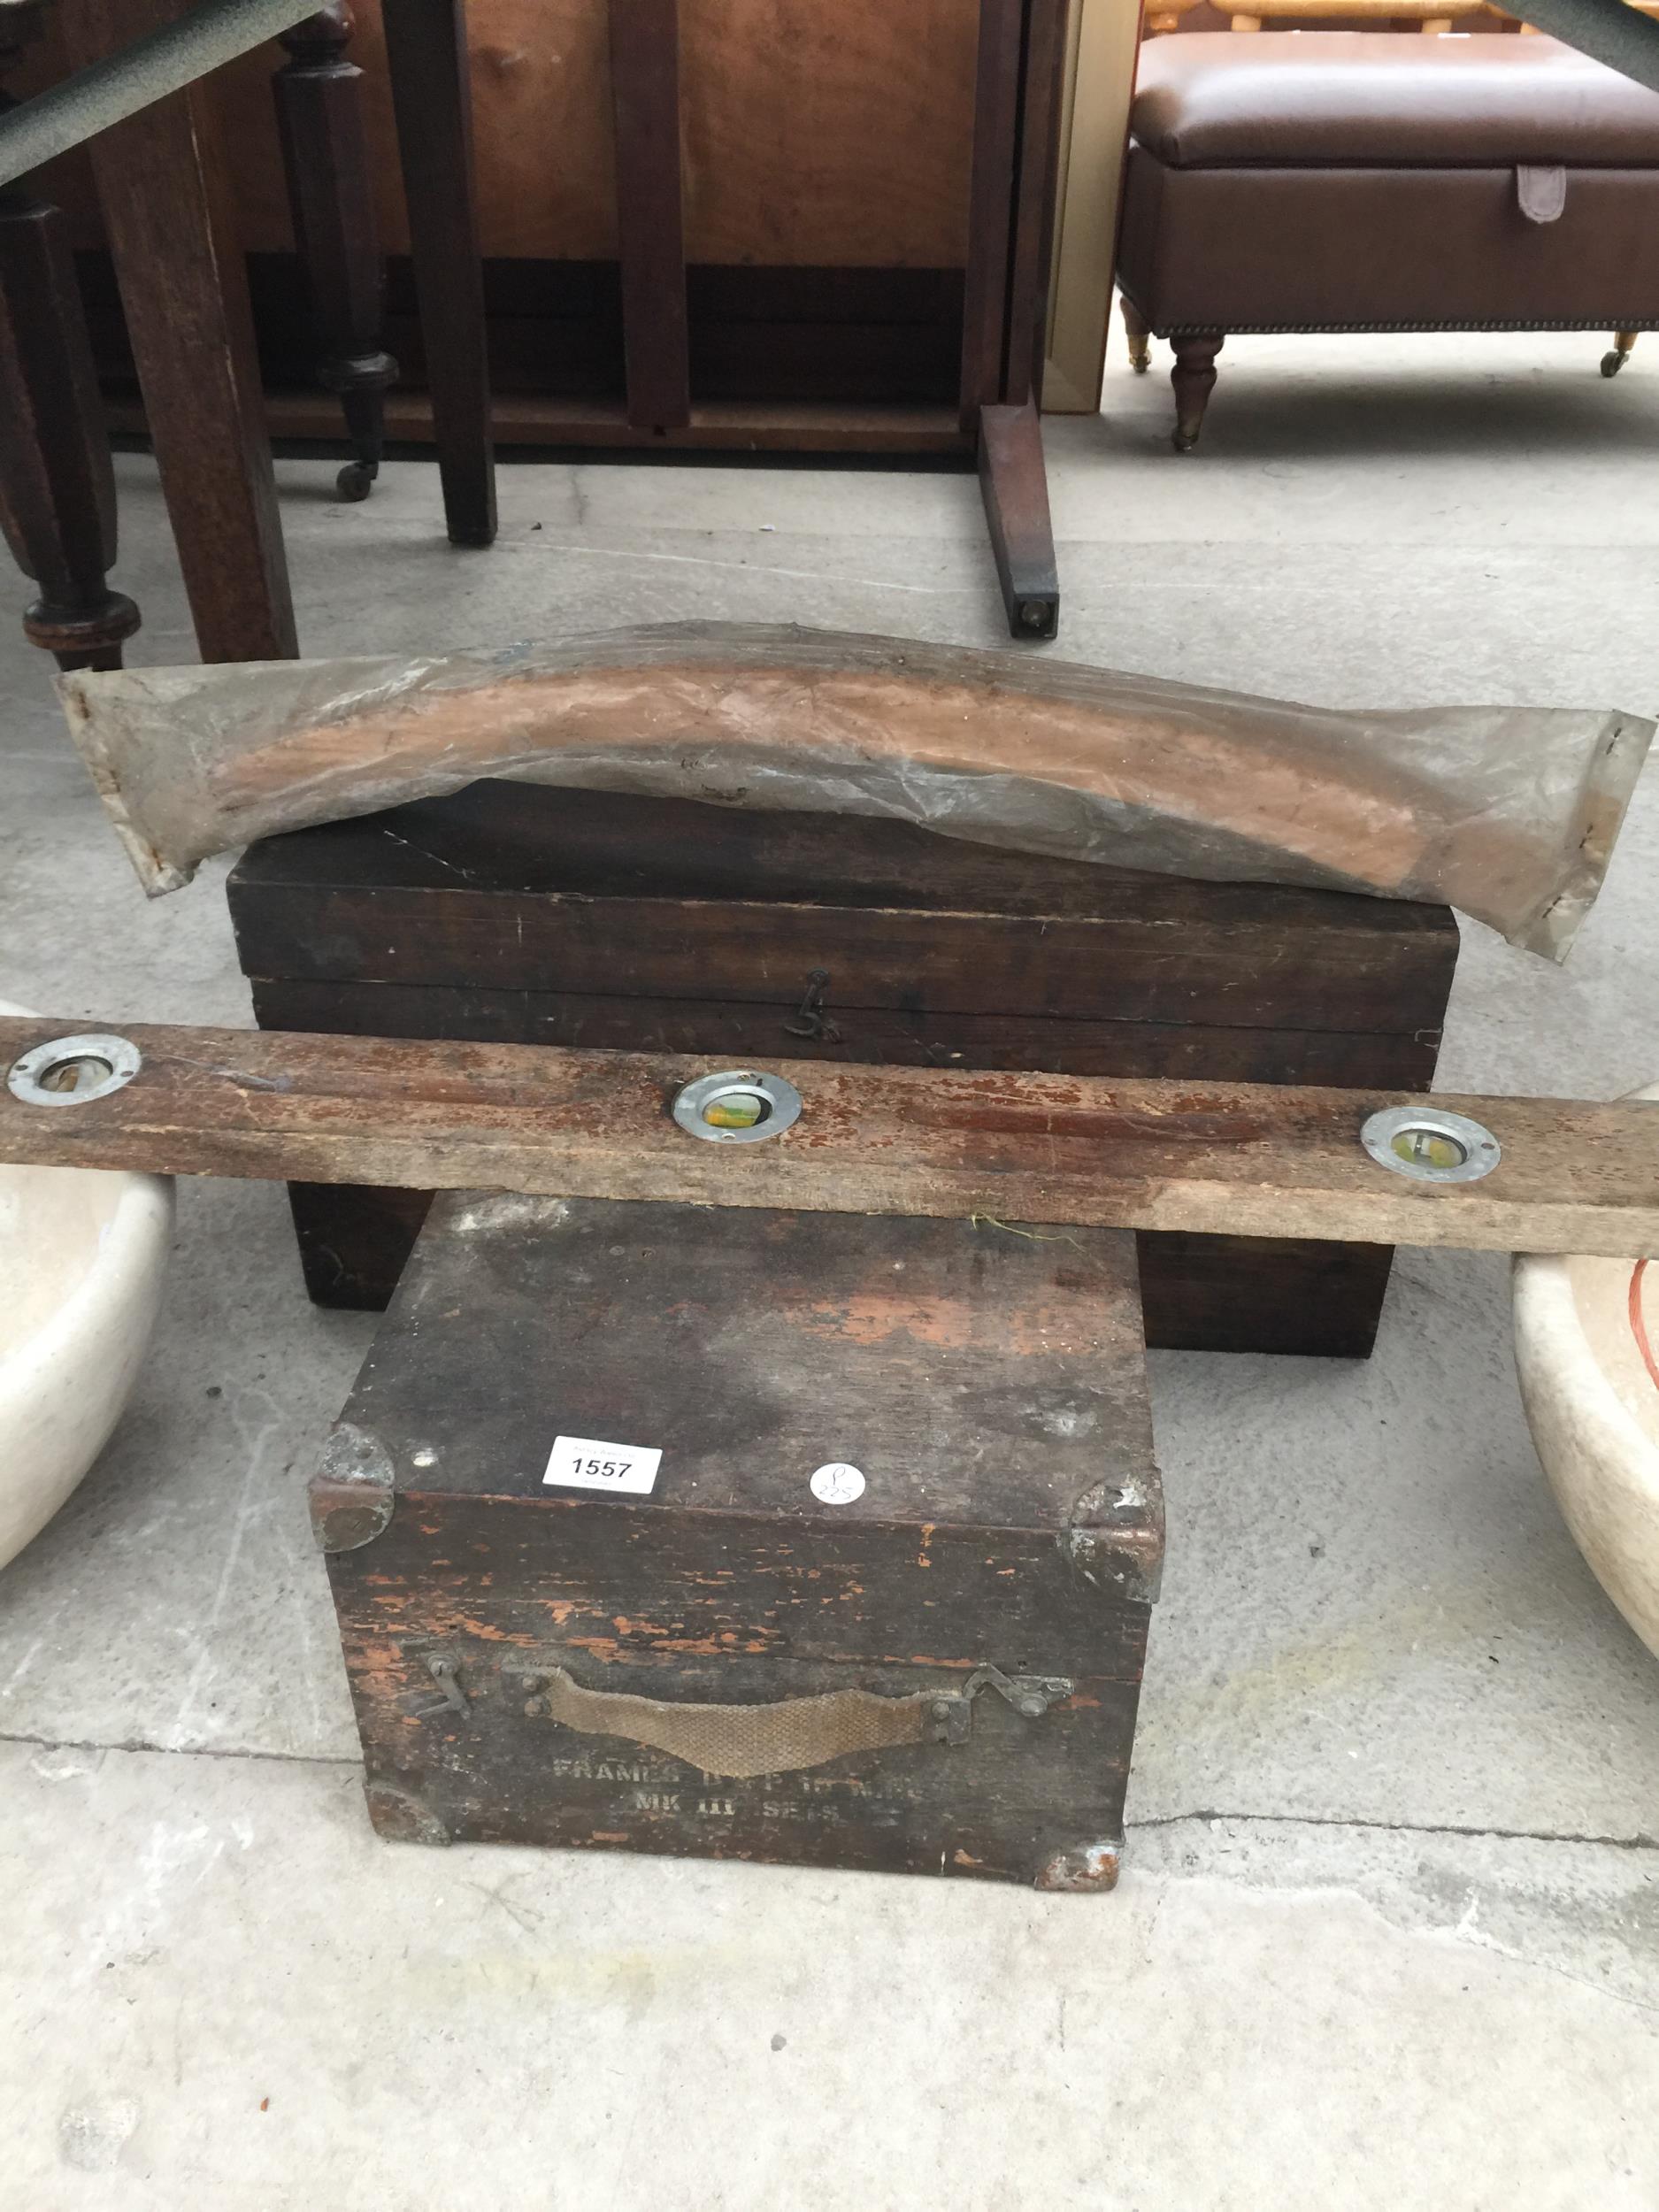 TWO VINTAGE WOODEN TOOL CHESTS AND A VINTAGE SPIRIT LEVEL